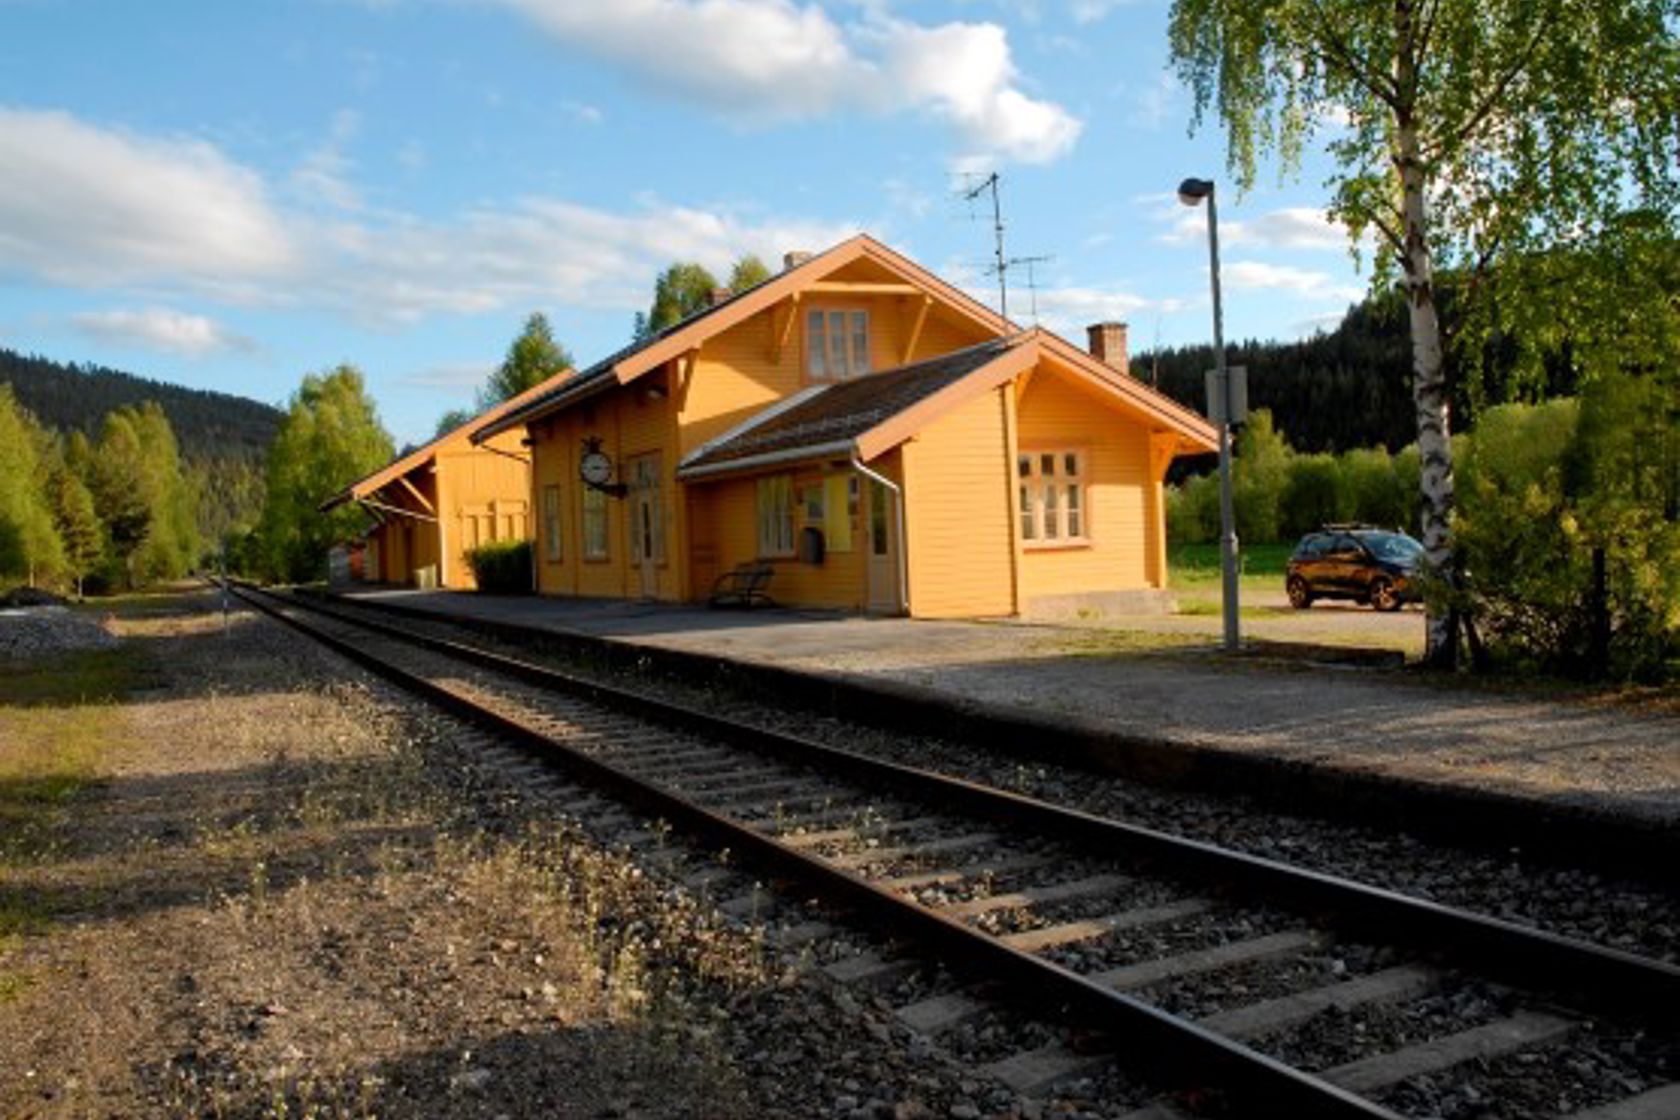 Exterior view of Stai station